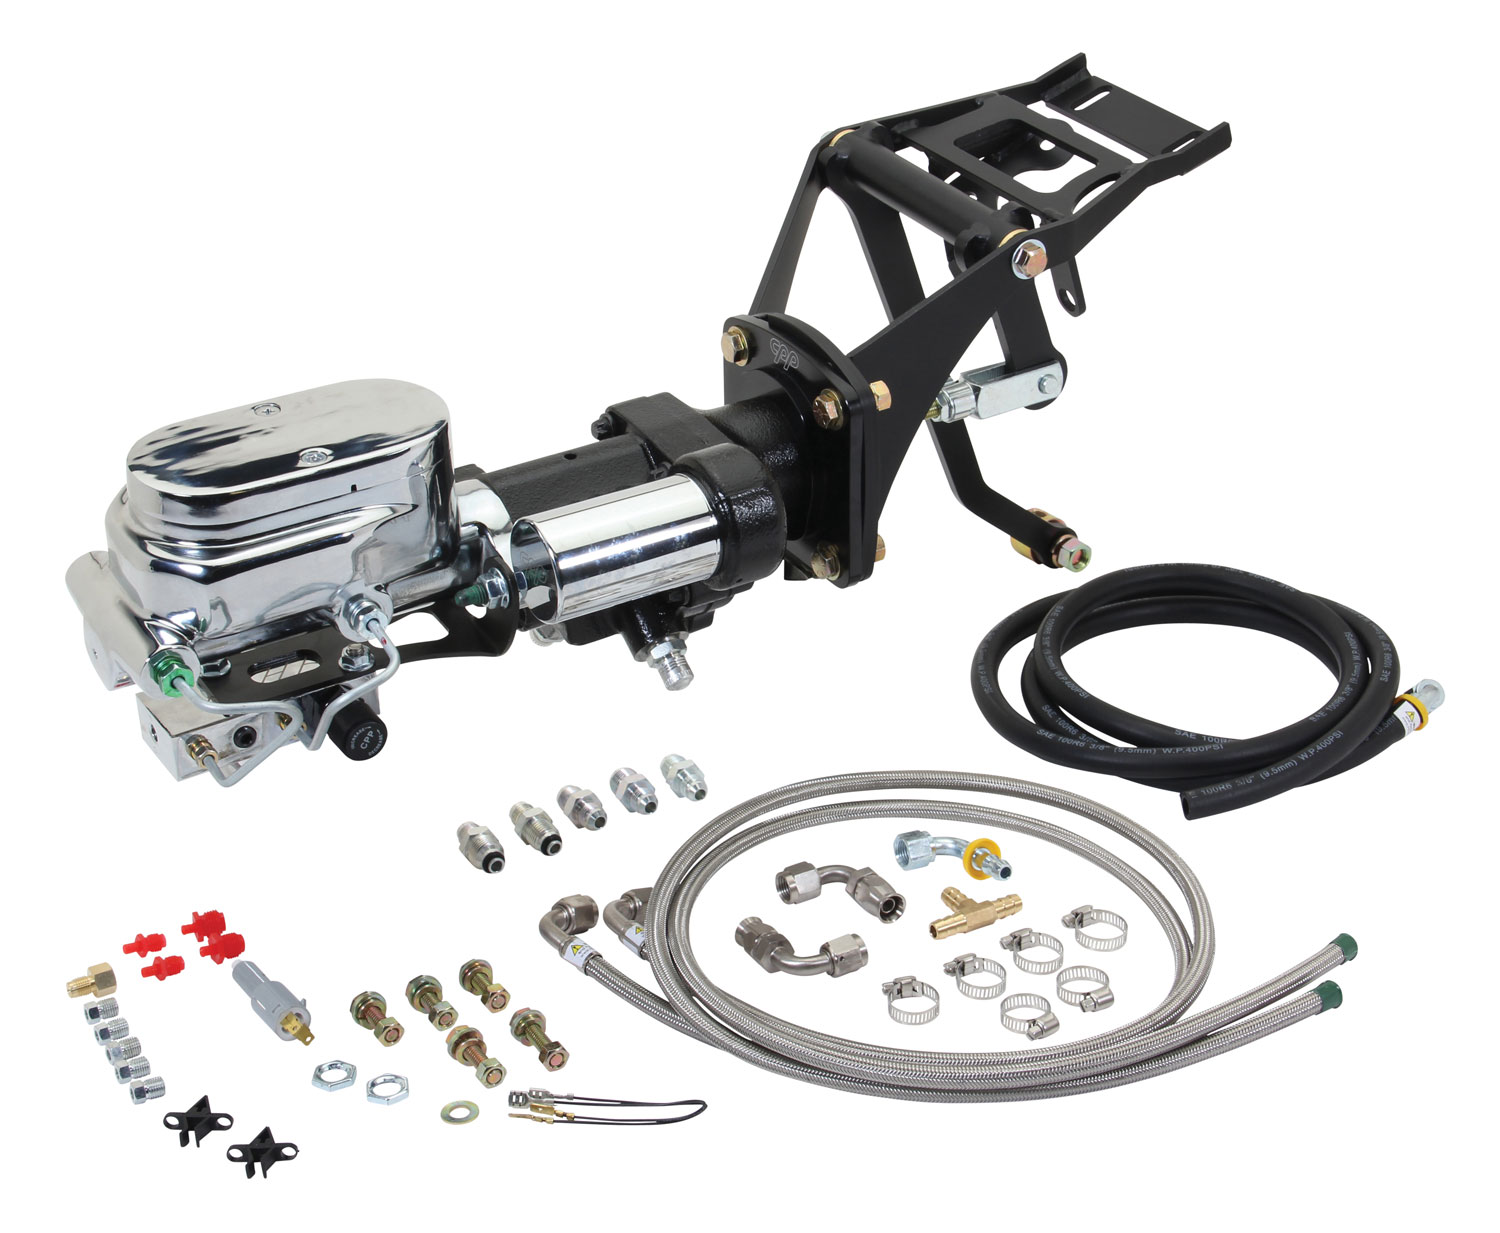 CPP’s Show Stopper hydraulic booster kit parts